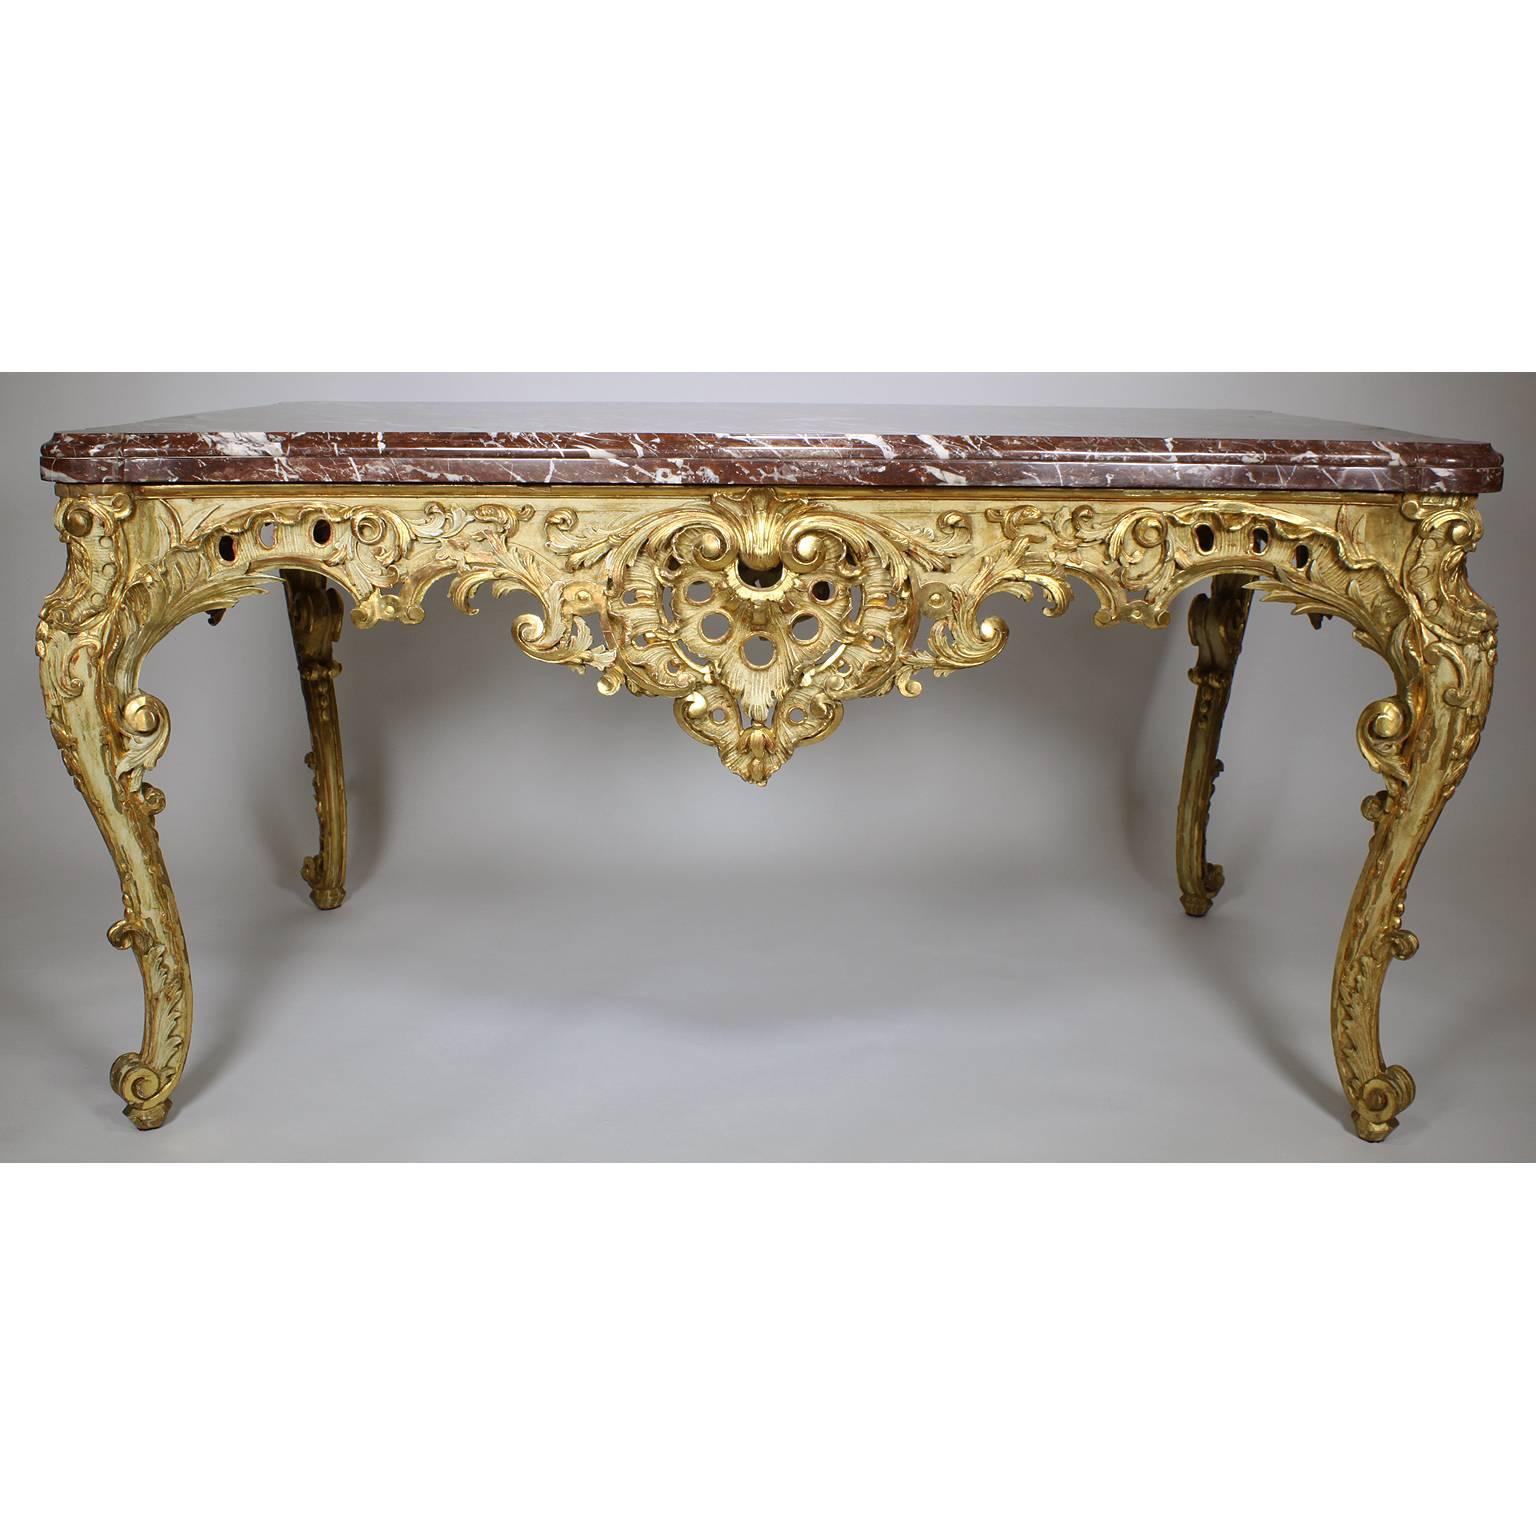 Rococo Revival French Rococo 19th Century Louis XV Style Parcel Giltwood Carved Centre Table For Sale